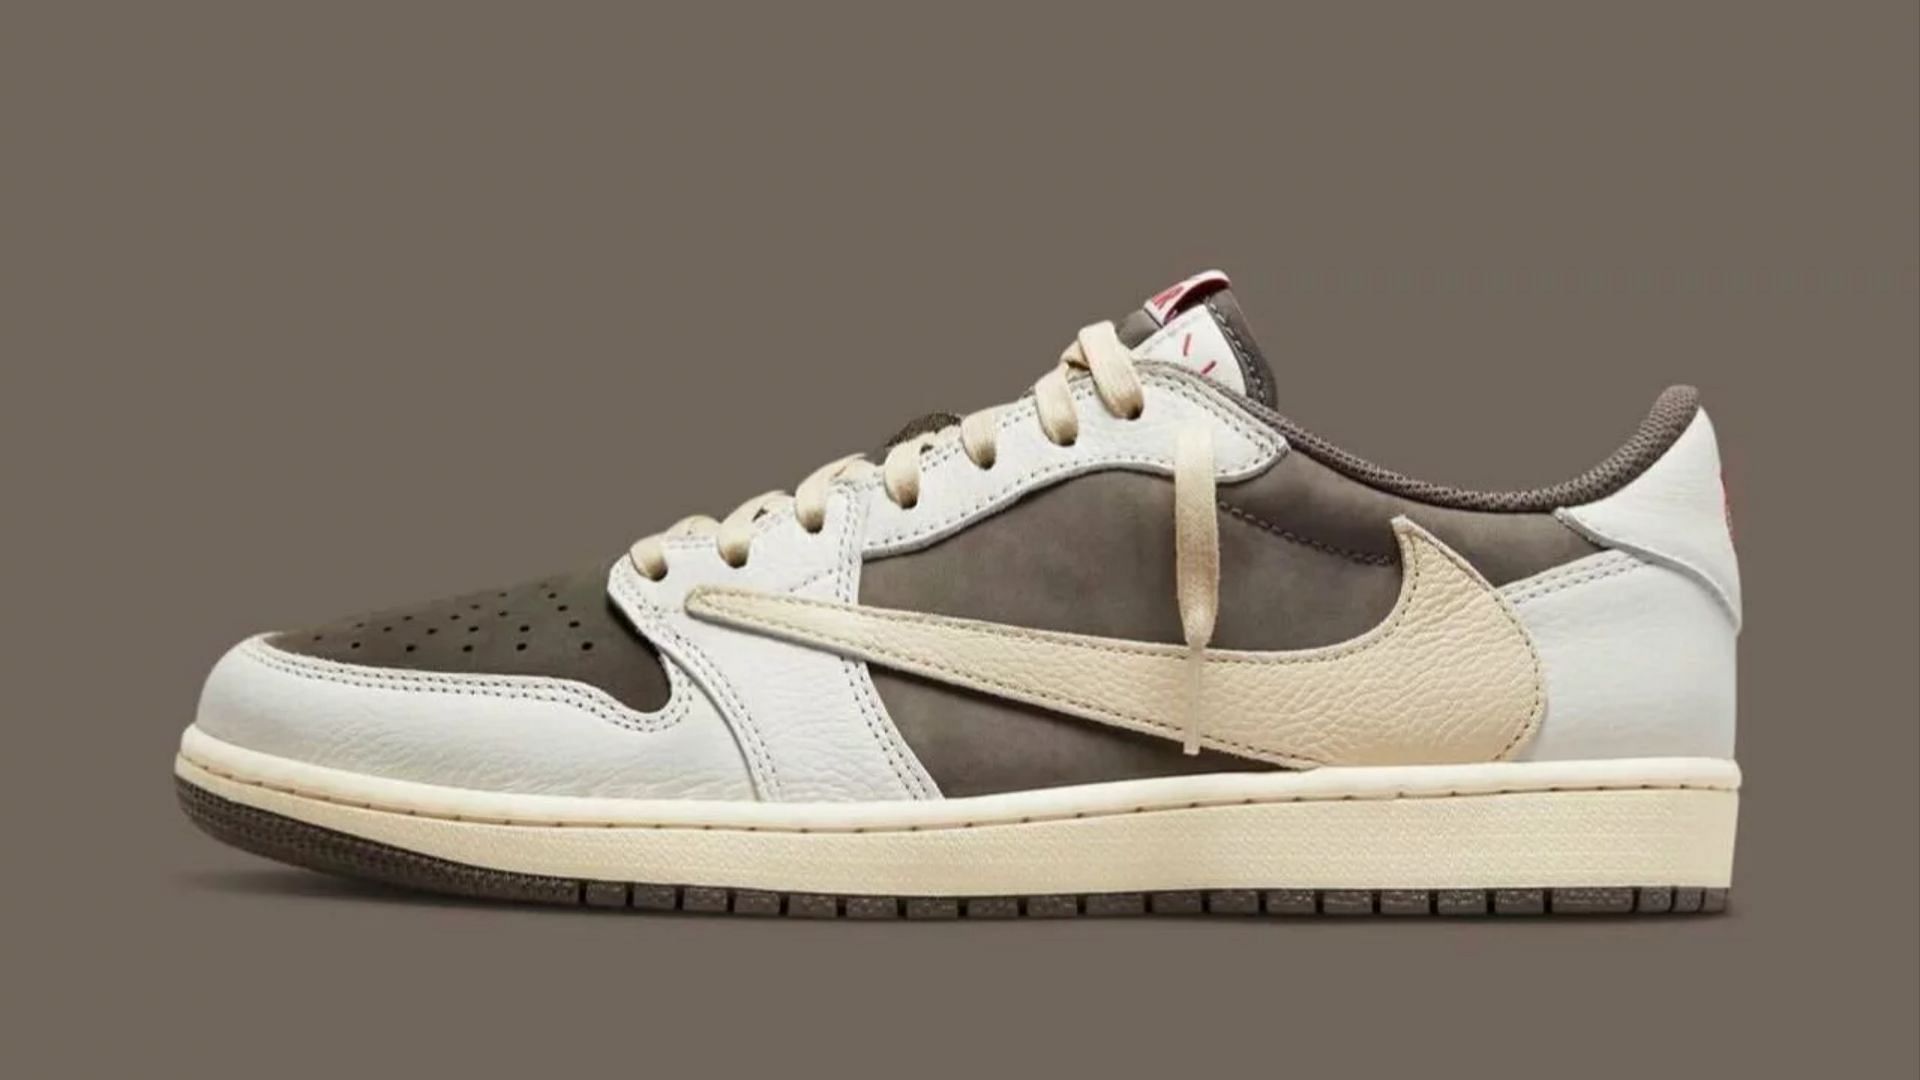 Where To Buy Travis Scott X Nike Air Jordan 1 Low Reverse Mocha? Price,  Release Date, And More Explored